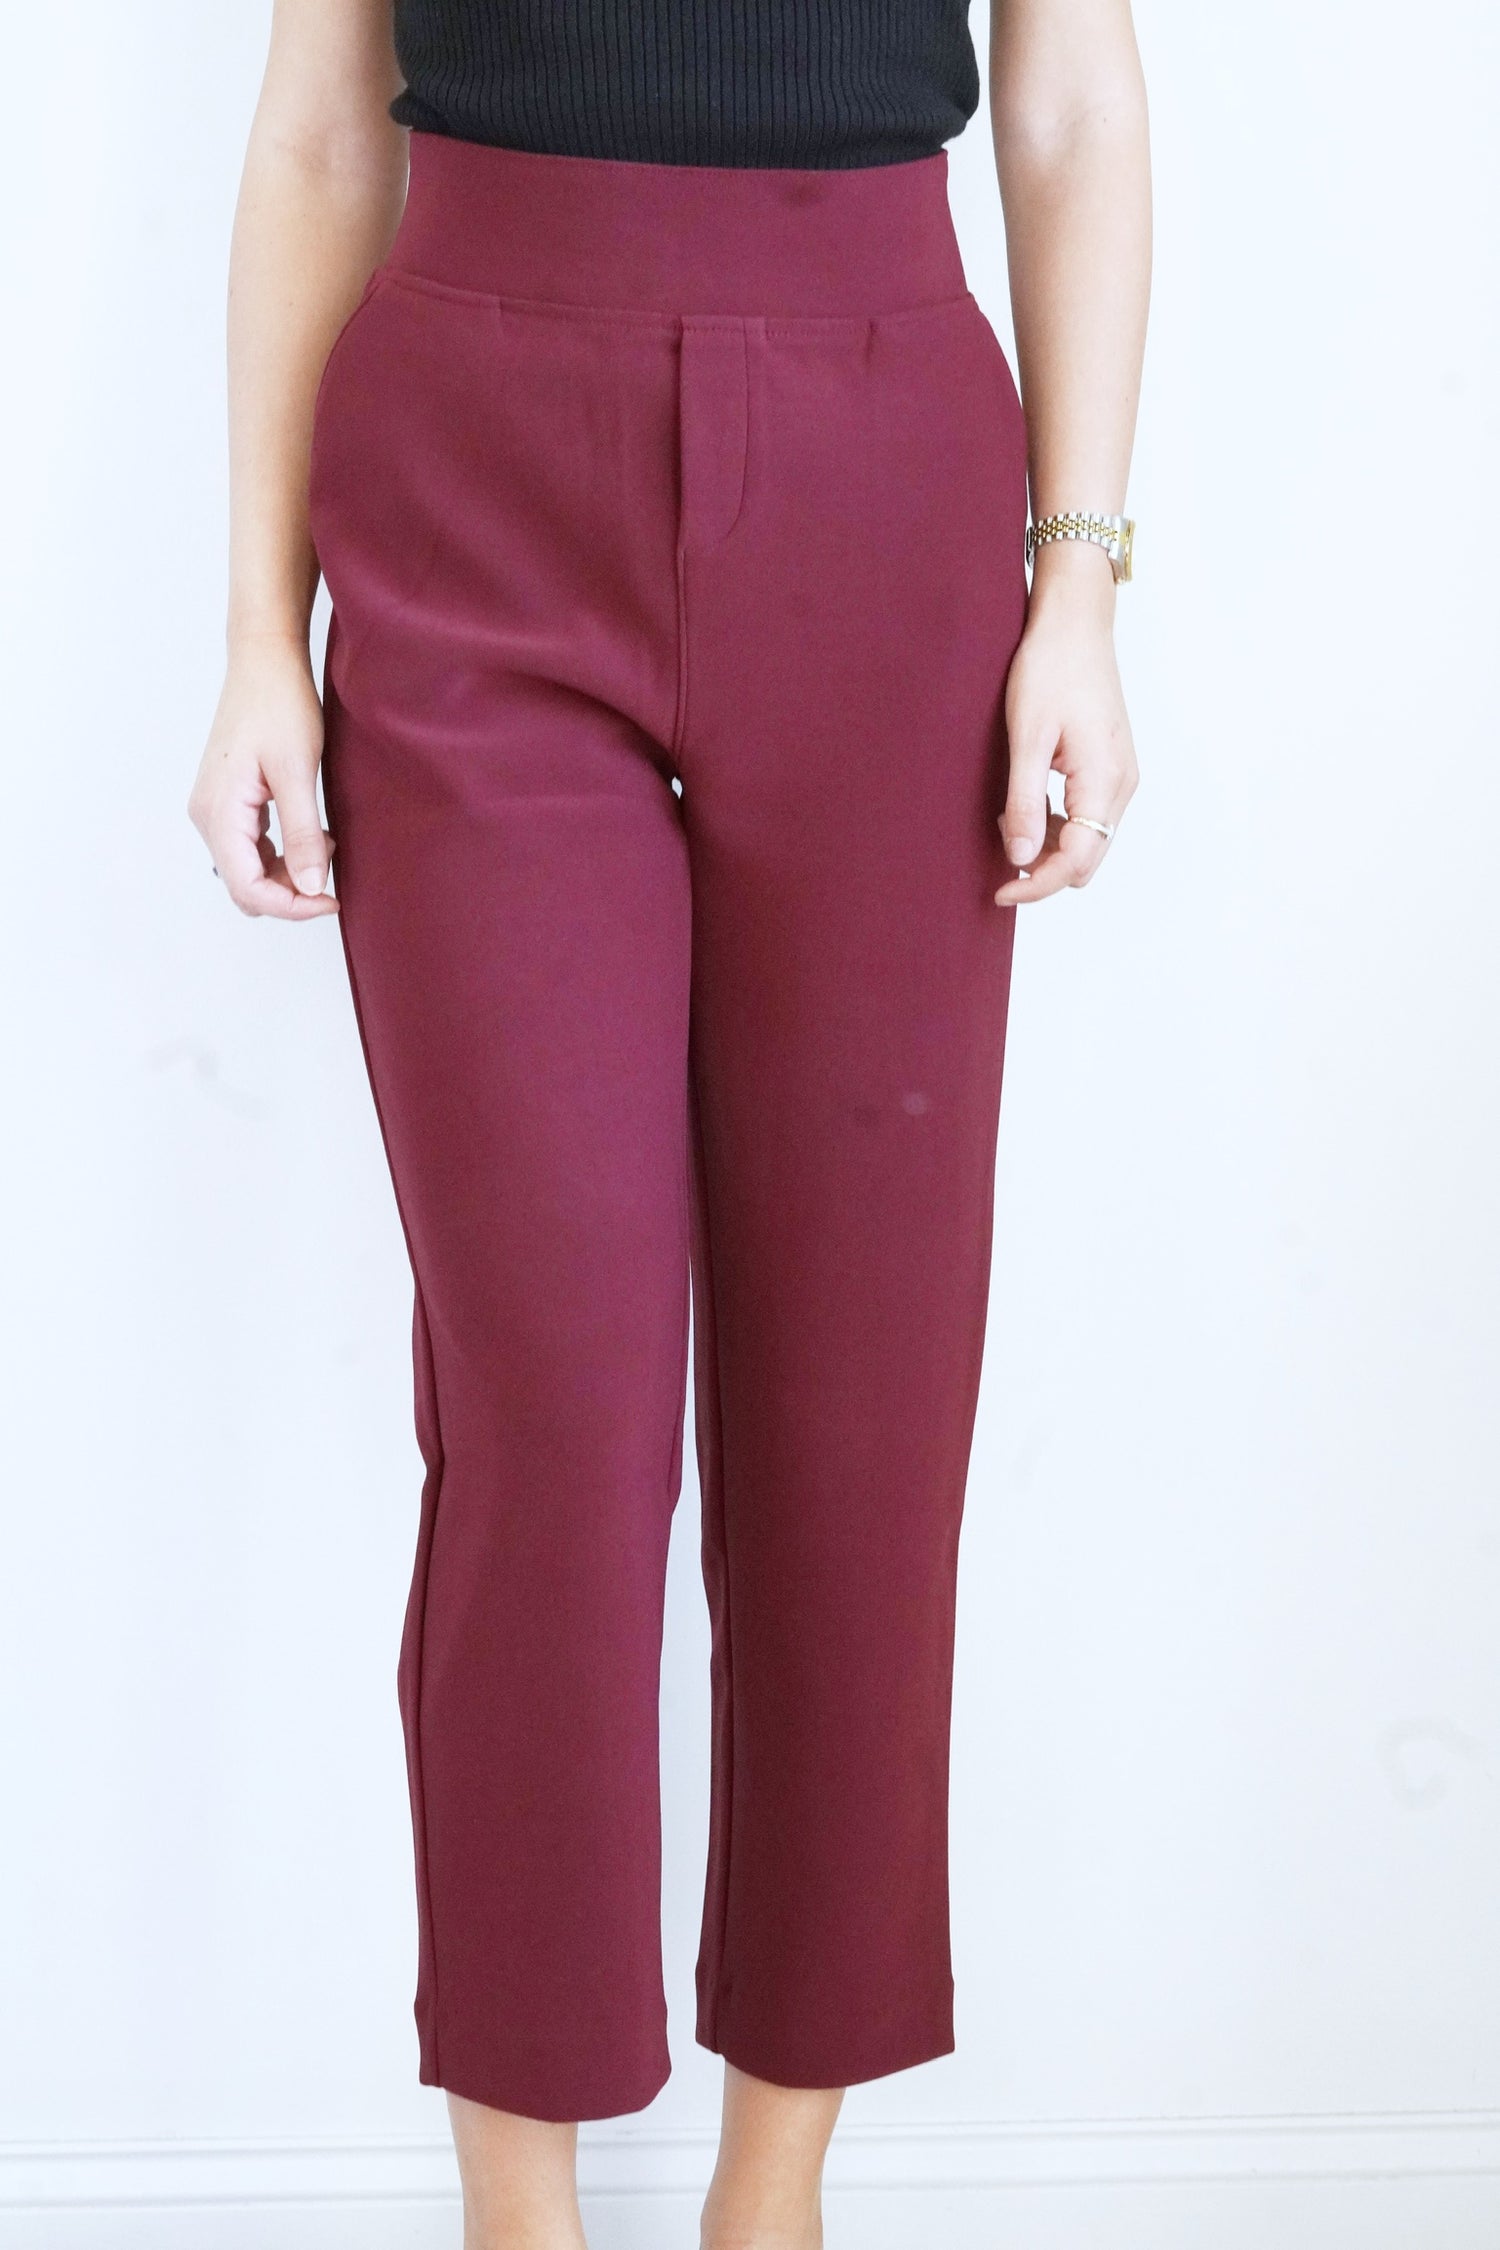 Serenity Sleek Dress Pant Thick Elastic Waistband Ankle Length Fitted Colors:  Burgundy Side Pockets 97% Polyester, 3% Spandex